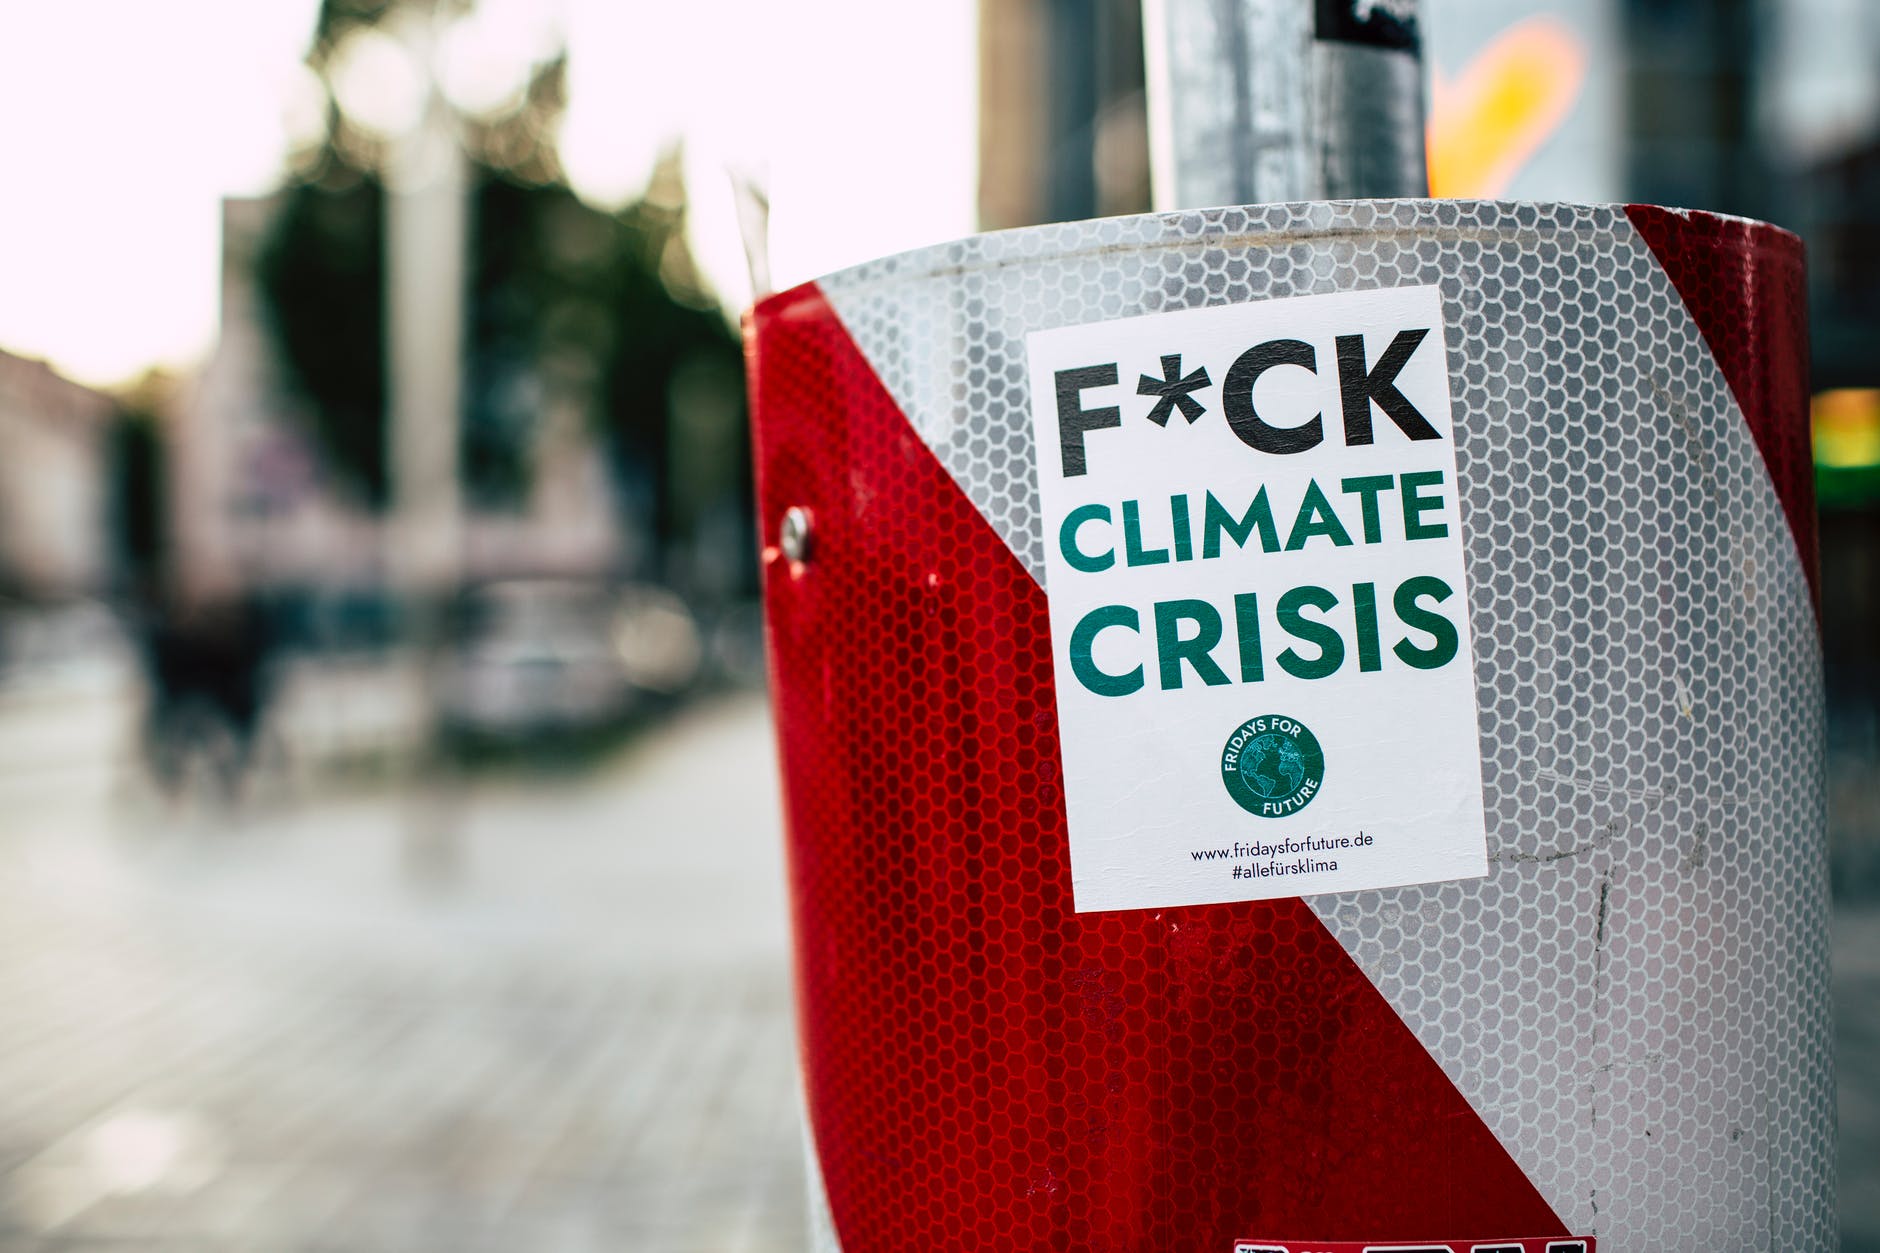 sticker of climate crisis attached in metal